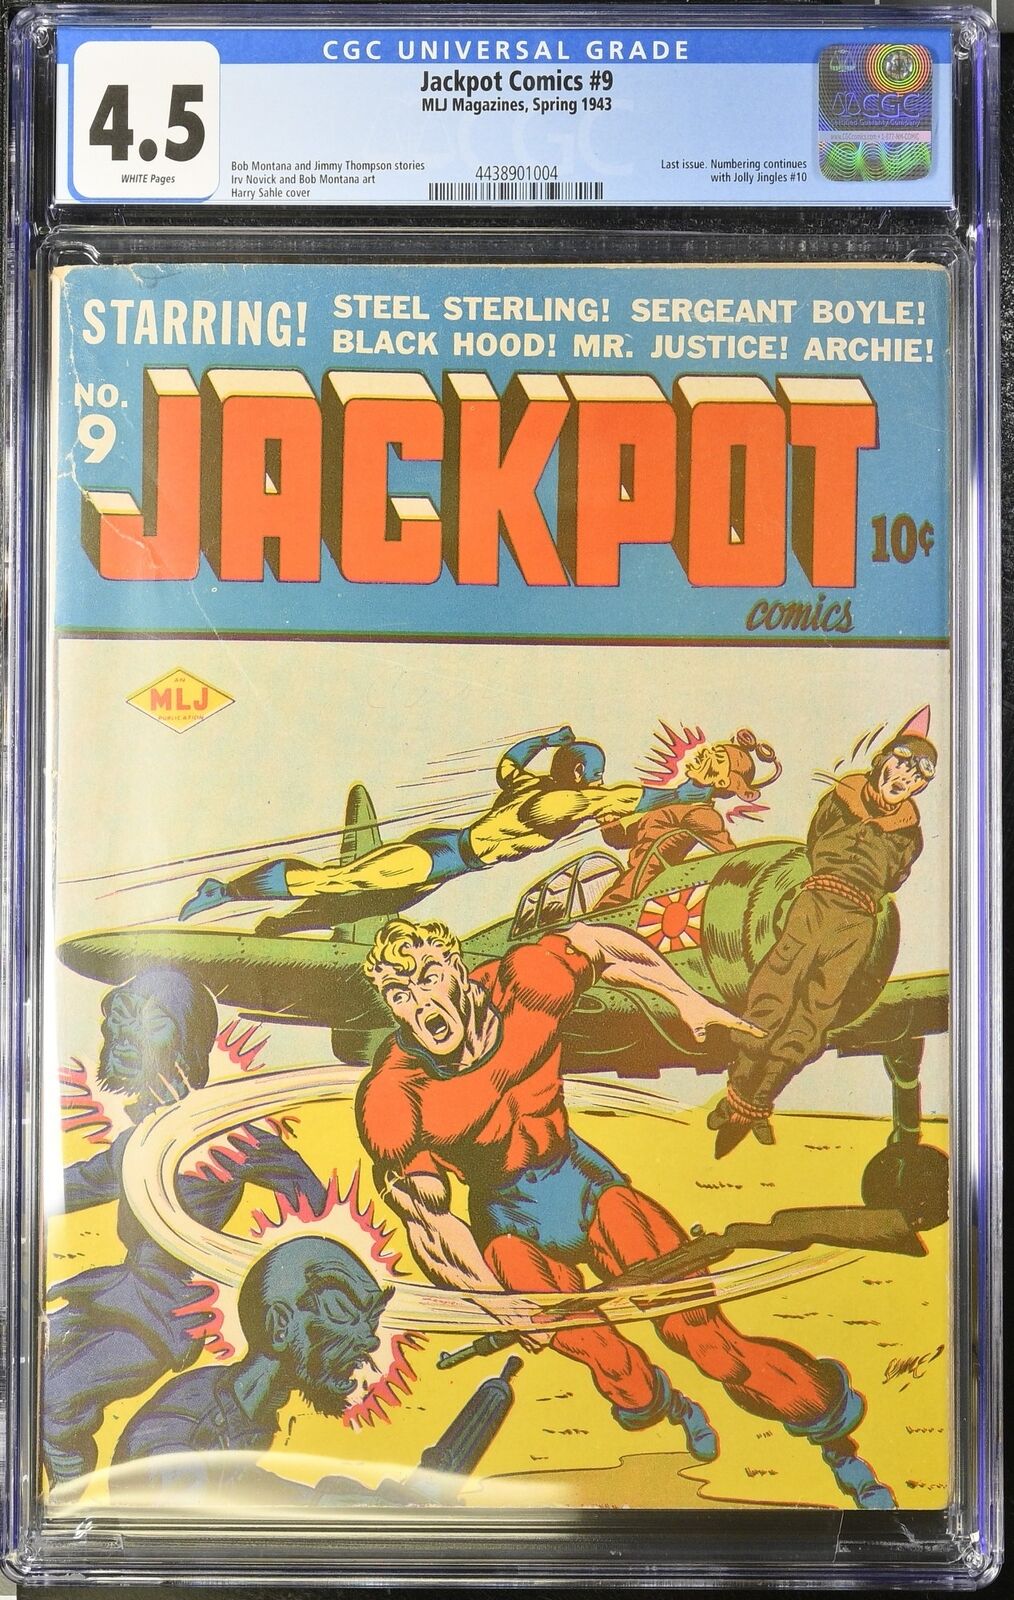 Jackpot Comics #9 CGC VG+ 4.5 White Pages Japanese WWII War Cover Archie 1943